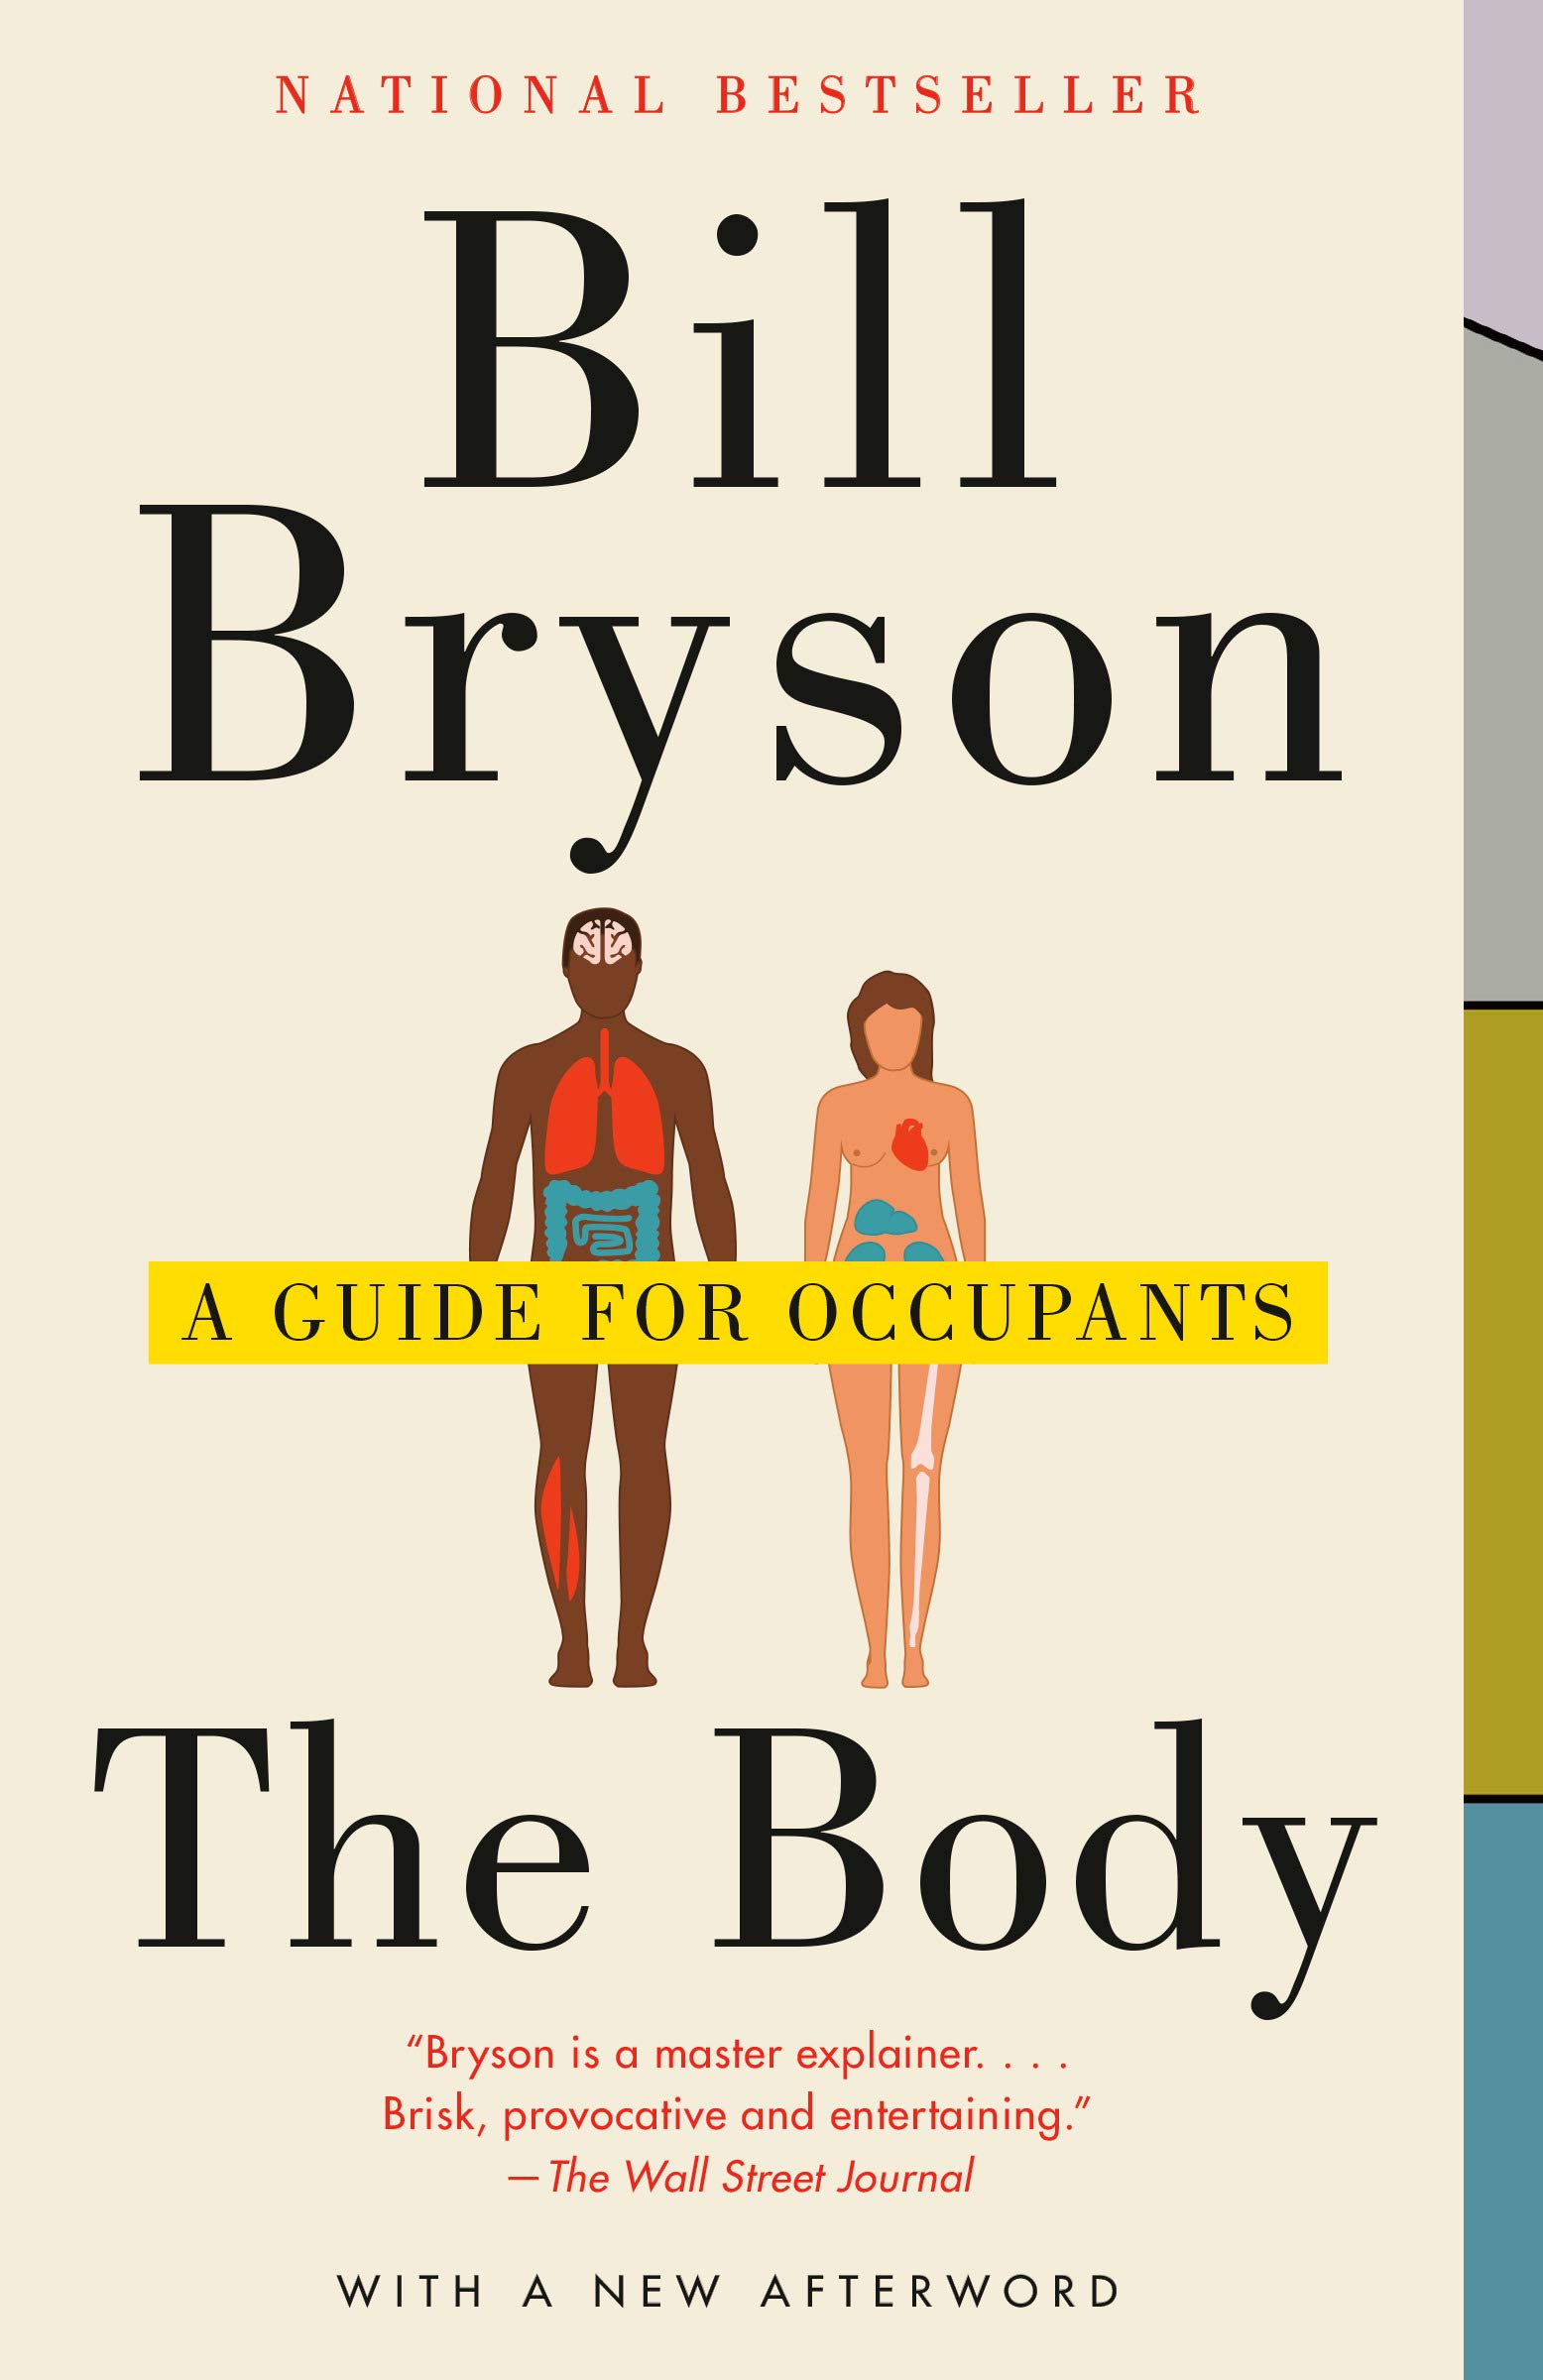 The Body: A Guide for Occupants (eBook) by Bill Bryson $1.99